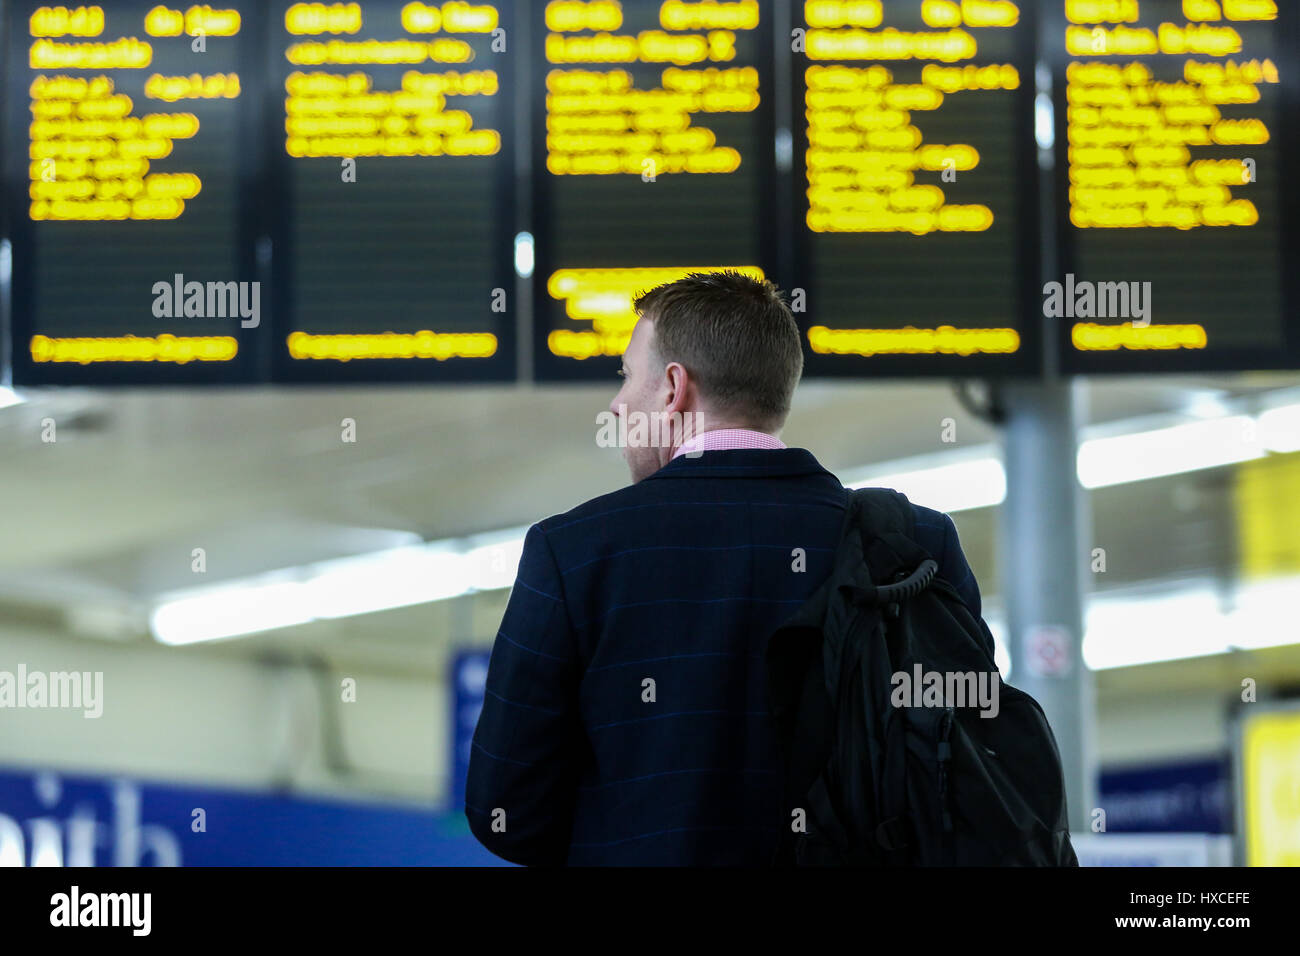 A man looks up at the Train timing screens at a train station in Yorkshire, England, UK. Stock Photo